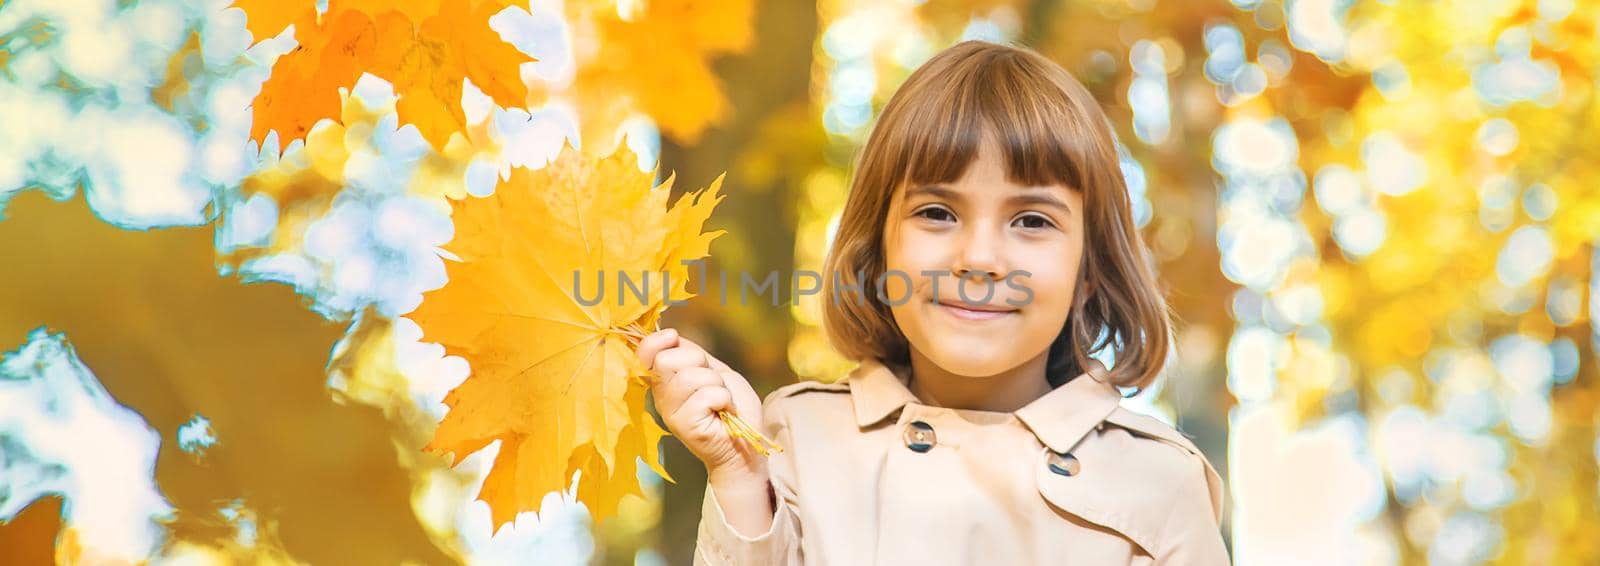 Children in the park with autumn leaves. Selective focus. by yanadjana